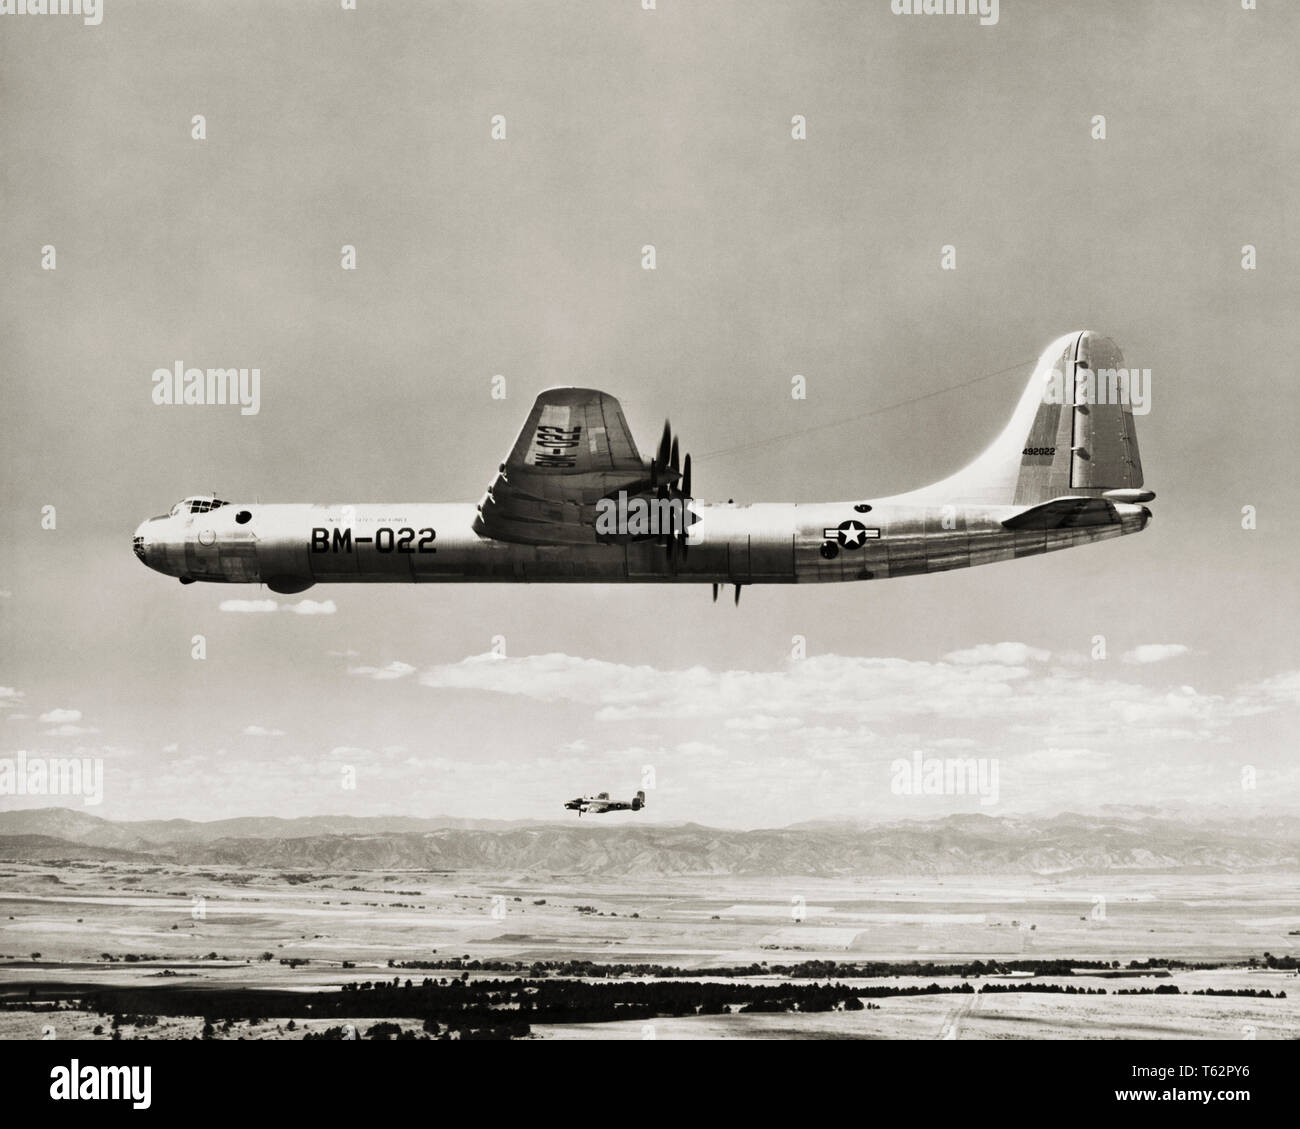 1950s USAF CONVAIR B-36 PEACEMAKER AIRPLANE STRATEGIC AIR COMMAND  SAC BOMBER NUCLEAR WEAPONS DELIVERY AIRCRAFT 1949-1959 - a365 BAU001 HARS CAPABLE CONVAIR NUCLEAR WEAPONS OLD FASHIONED PEACEMAKER SAC STRATEGIC AIR COMMAND UNITED STATES AIR FORCE USAF Stock Photo